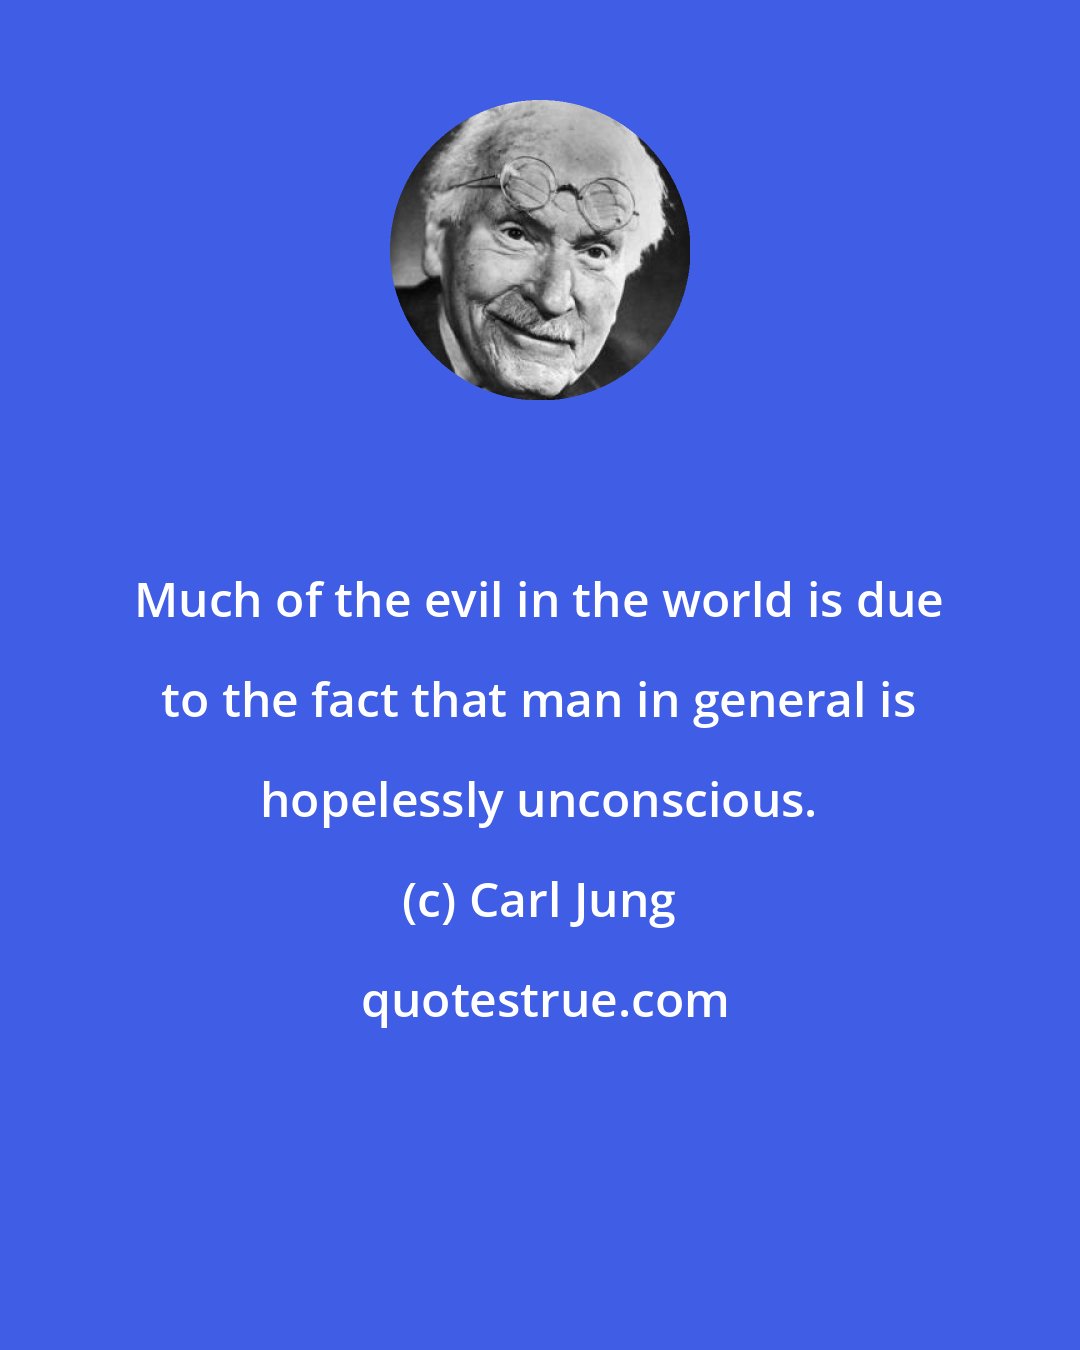 Carl Jung: Much of the evil in the world is due to the fact that man in general is hopelessly unconscious.